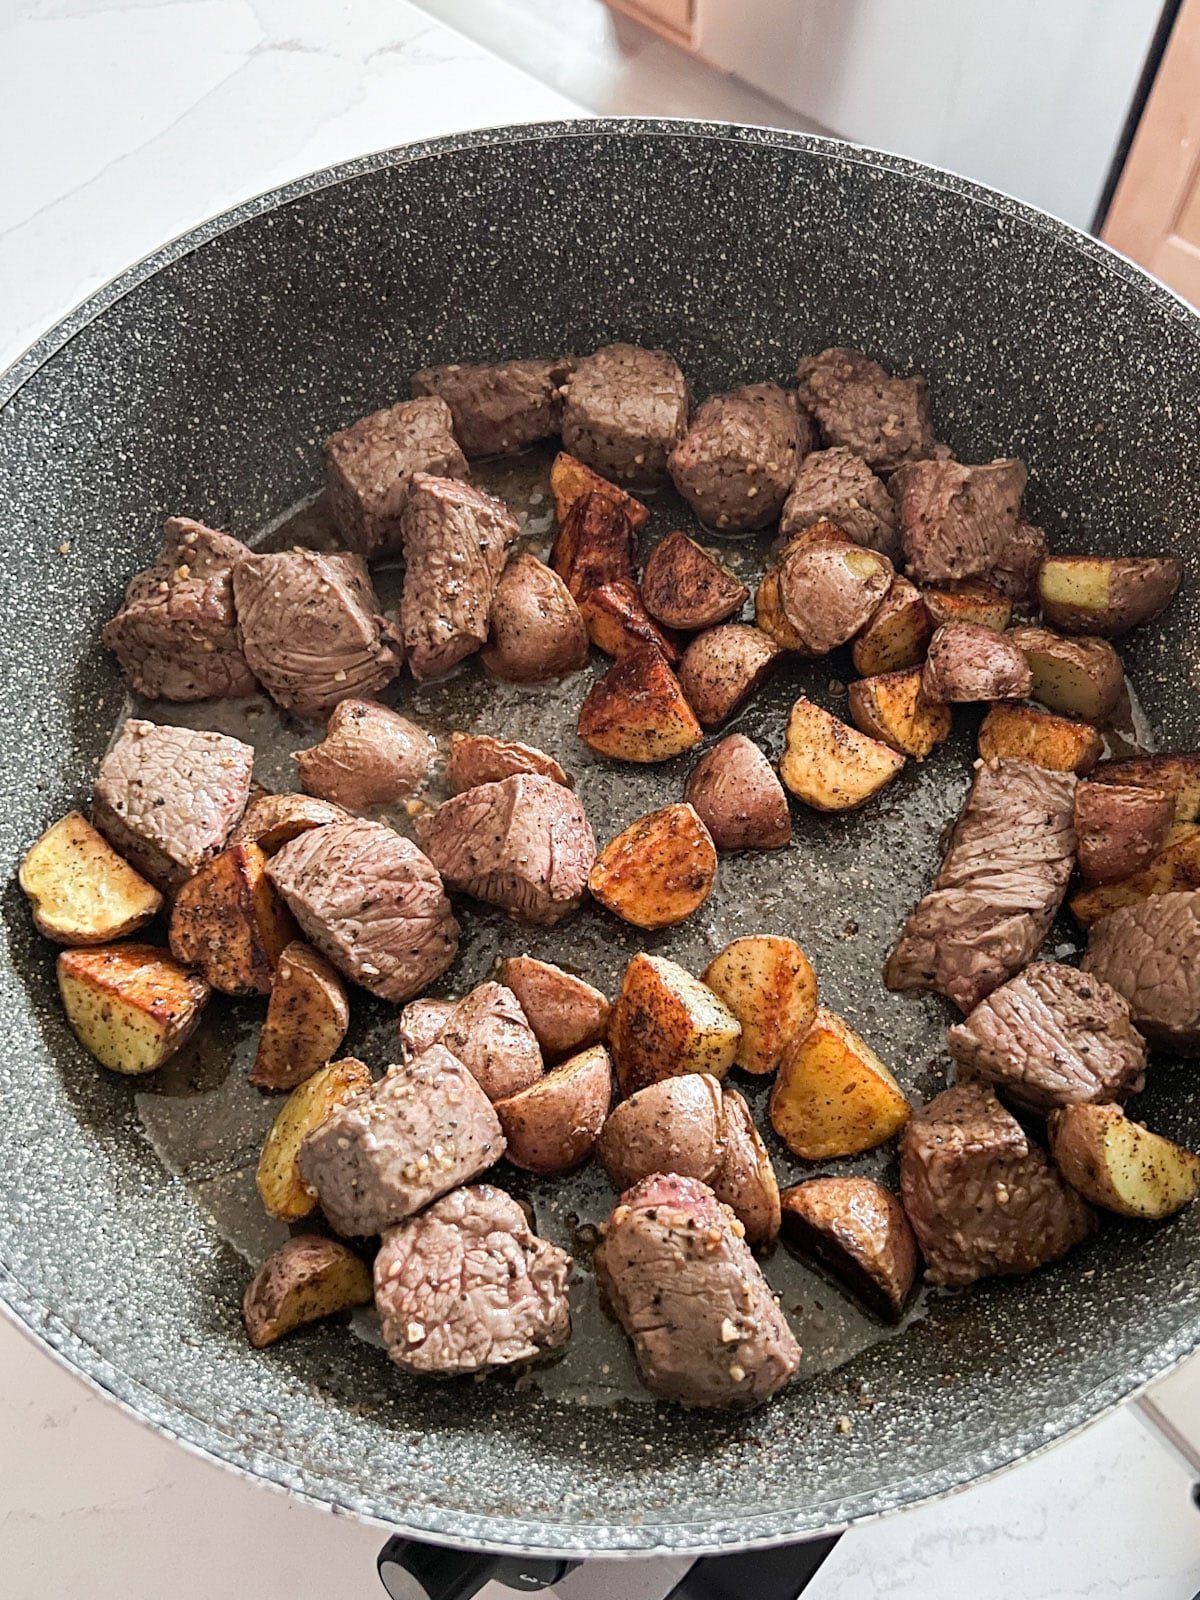 Potatoes added to the skillet of cooked beef.